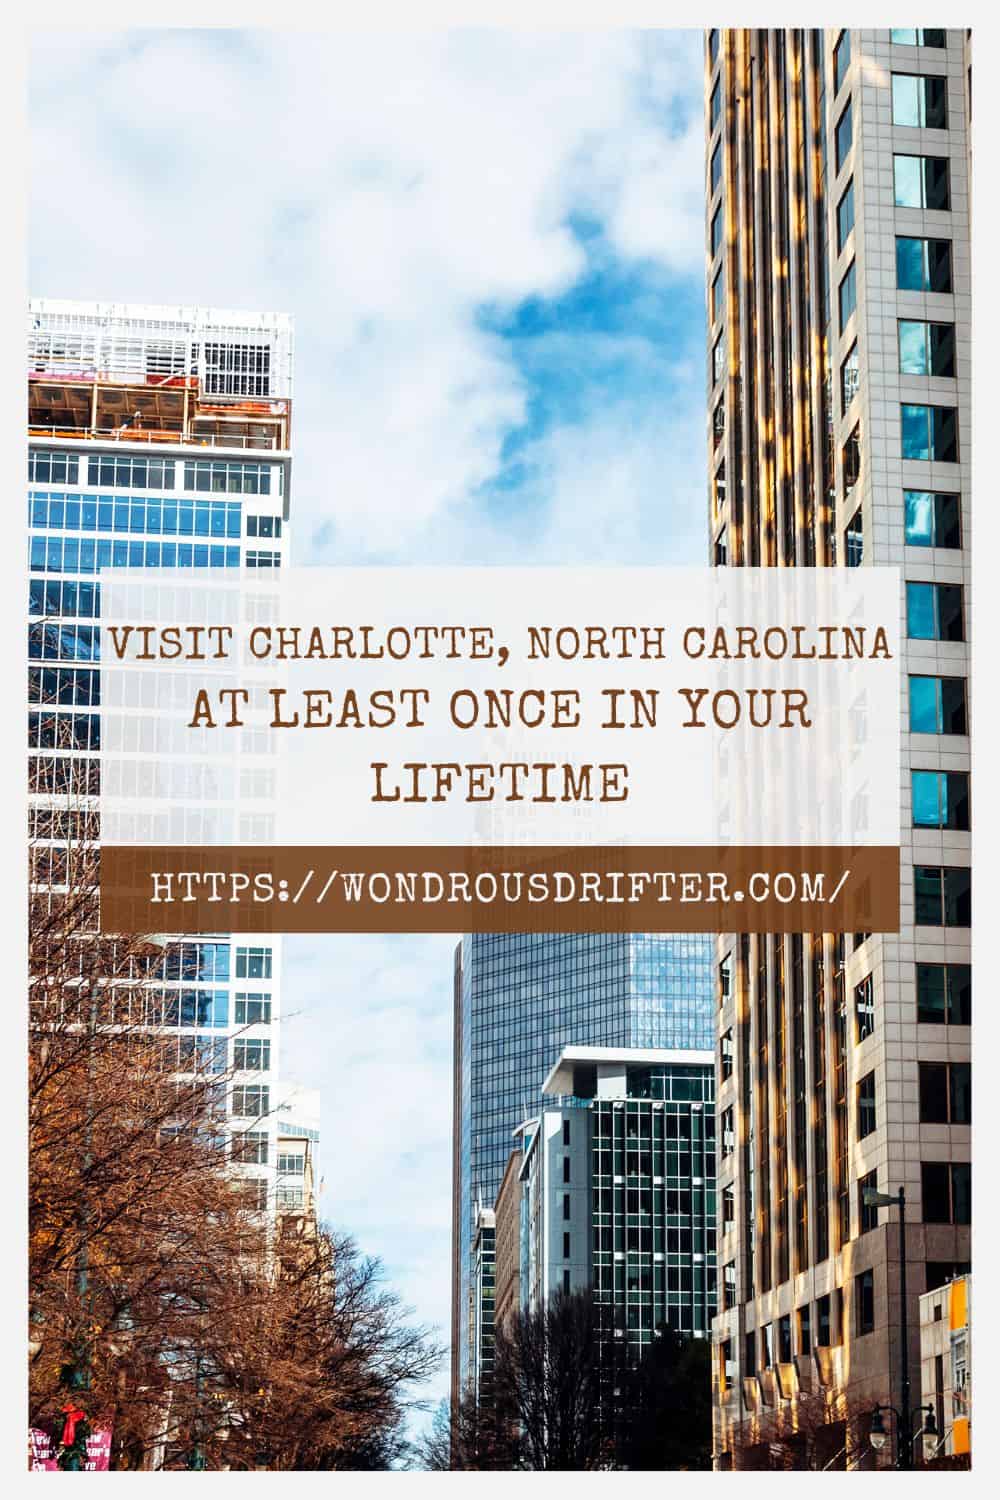 Visit Charlotte North Carolina at least once in your lifetime